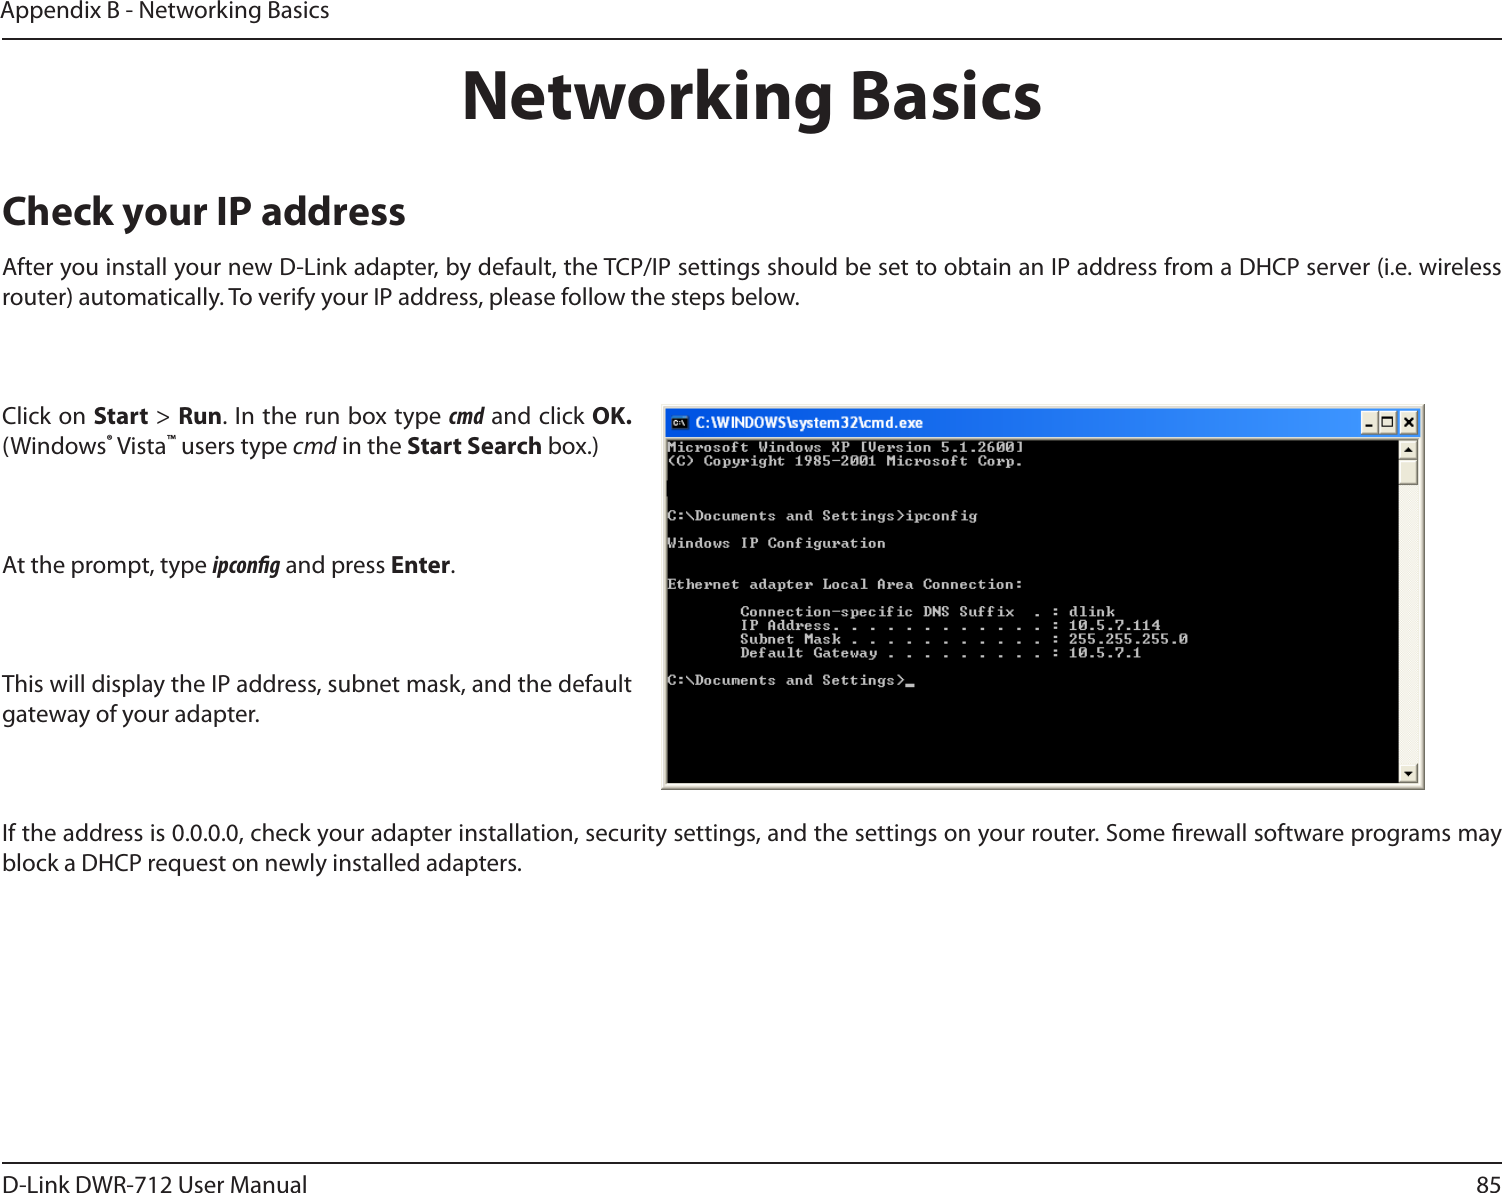 85D-Link DWR-712 User ManualAppendix B - Networking BasicsNetworking BasicsCheck your IP addressAfter you install your new D-Link adapter, by default, the TCP/IP settings should be set to obtain an IP address from a DHCP server (i.e. wireless router) automatically. To verify your IP address, please follow the steps below.Click on Start &gt; Run. In the run box type cmd and click OK. (Windows® Vista™ users type cmd in the Start Search box.)At the prompt, type ipcong and press Enter.This will display the IP address, subnet mask, and the default gateway of your adapter.If the address is 0.0.0.0, check your adapter installation, security settings, and the settings on your router. Some rewall software programs may block a DHCP request on newly installed adapters. 